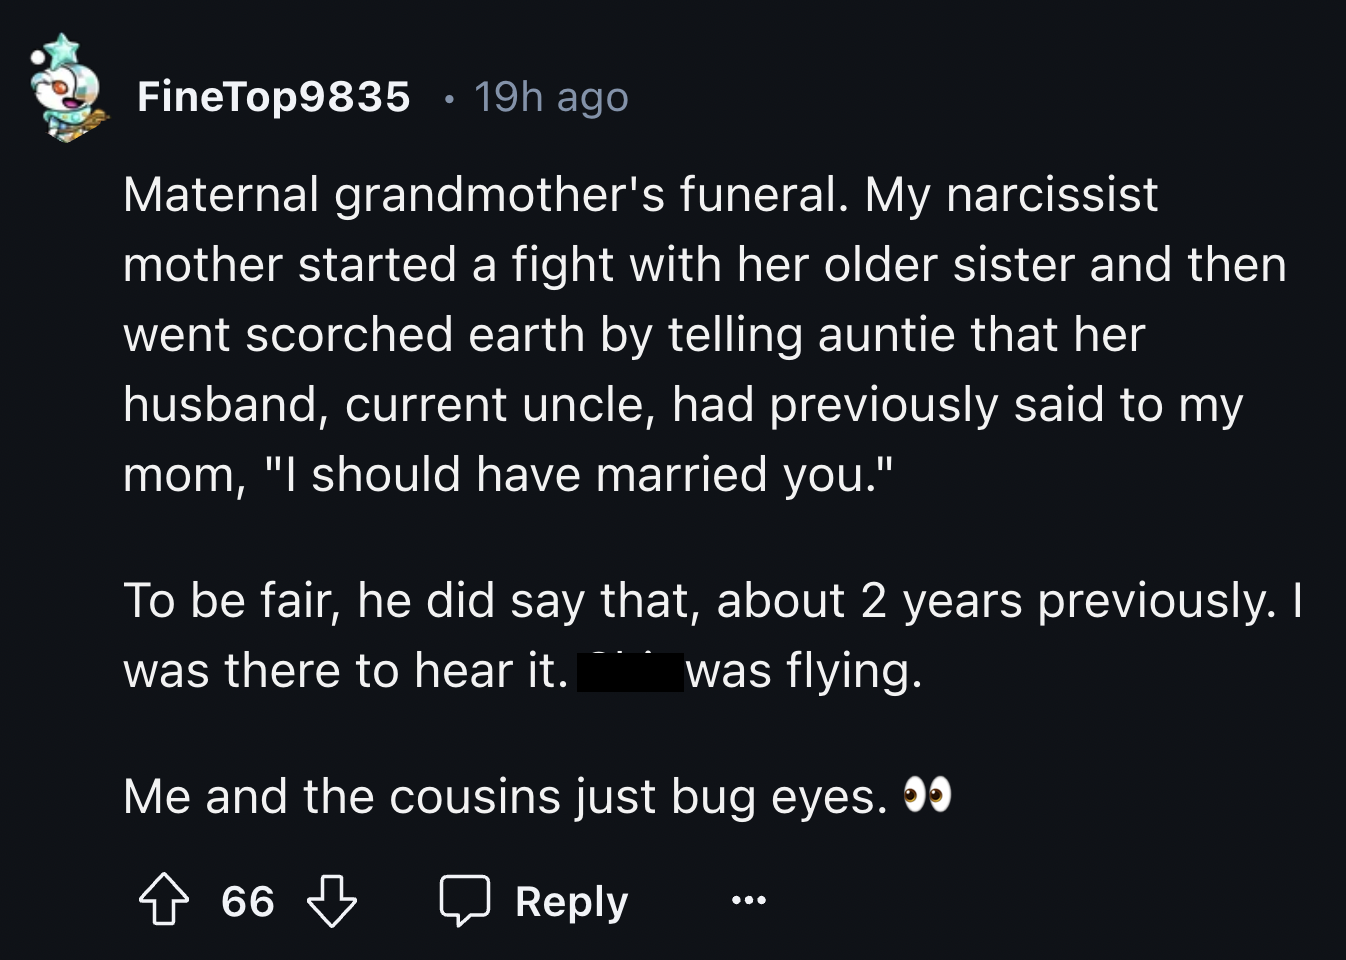 screenshot - FineTop9835 19h ago Maternal grandmother's funeral. My narcissist mother started a fight with her older sister and then went scorched earth by telling auntie that her husband, current uncle, had previously said to my mom, "I should have marri